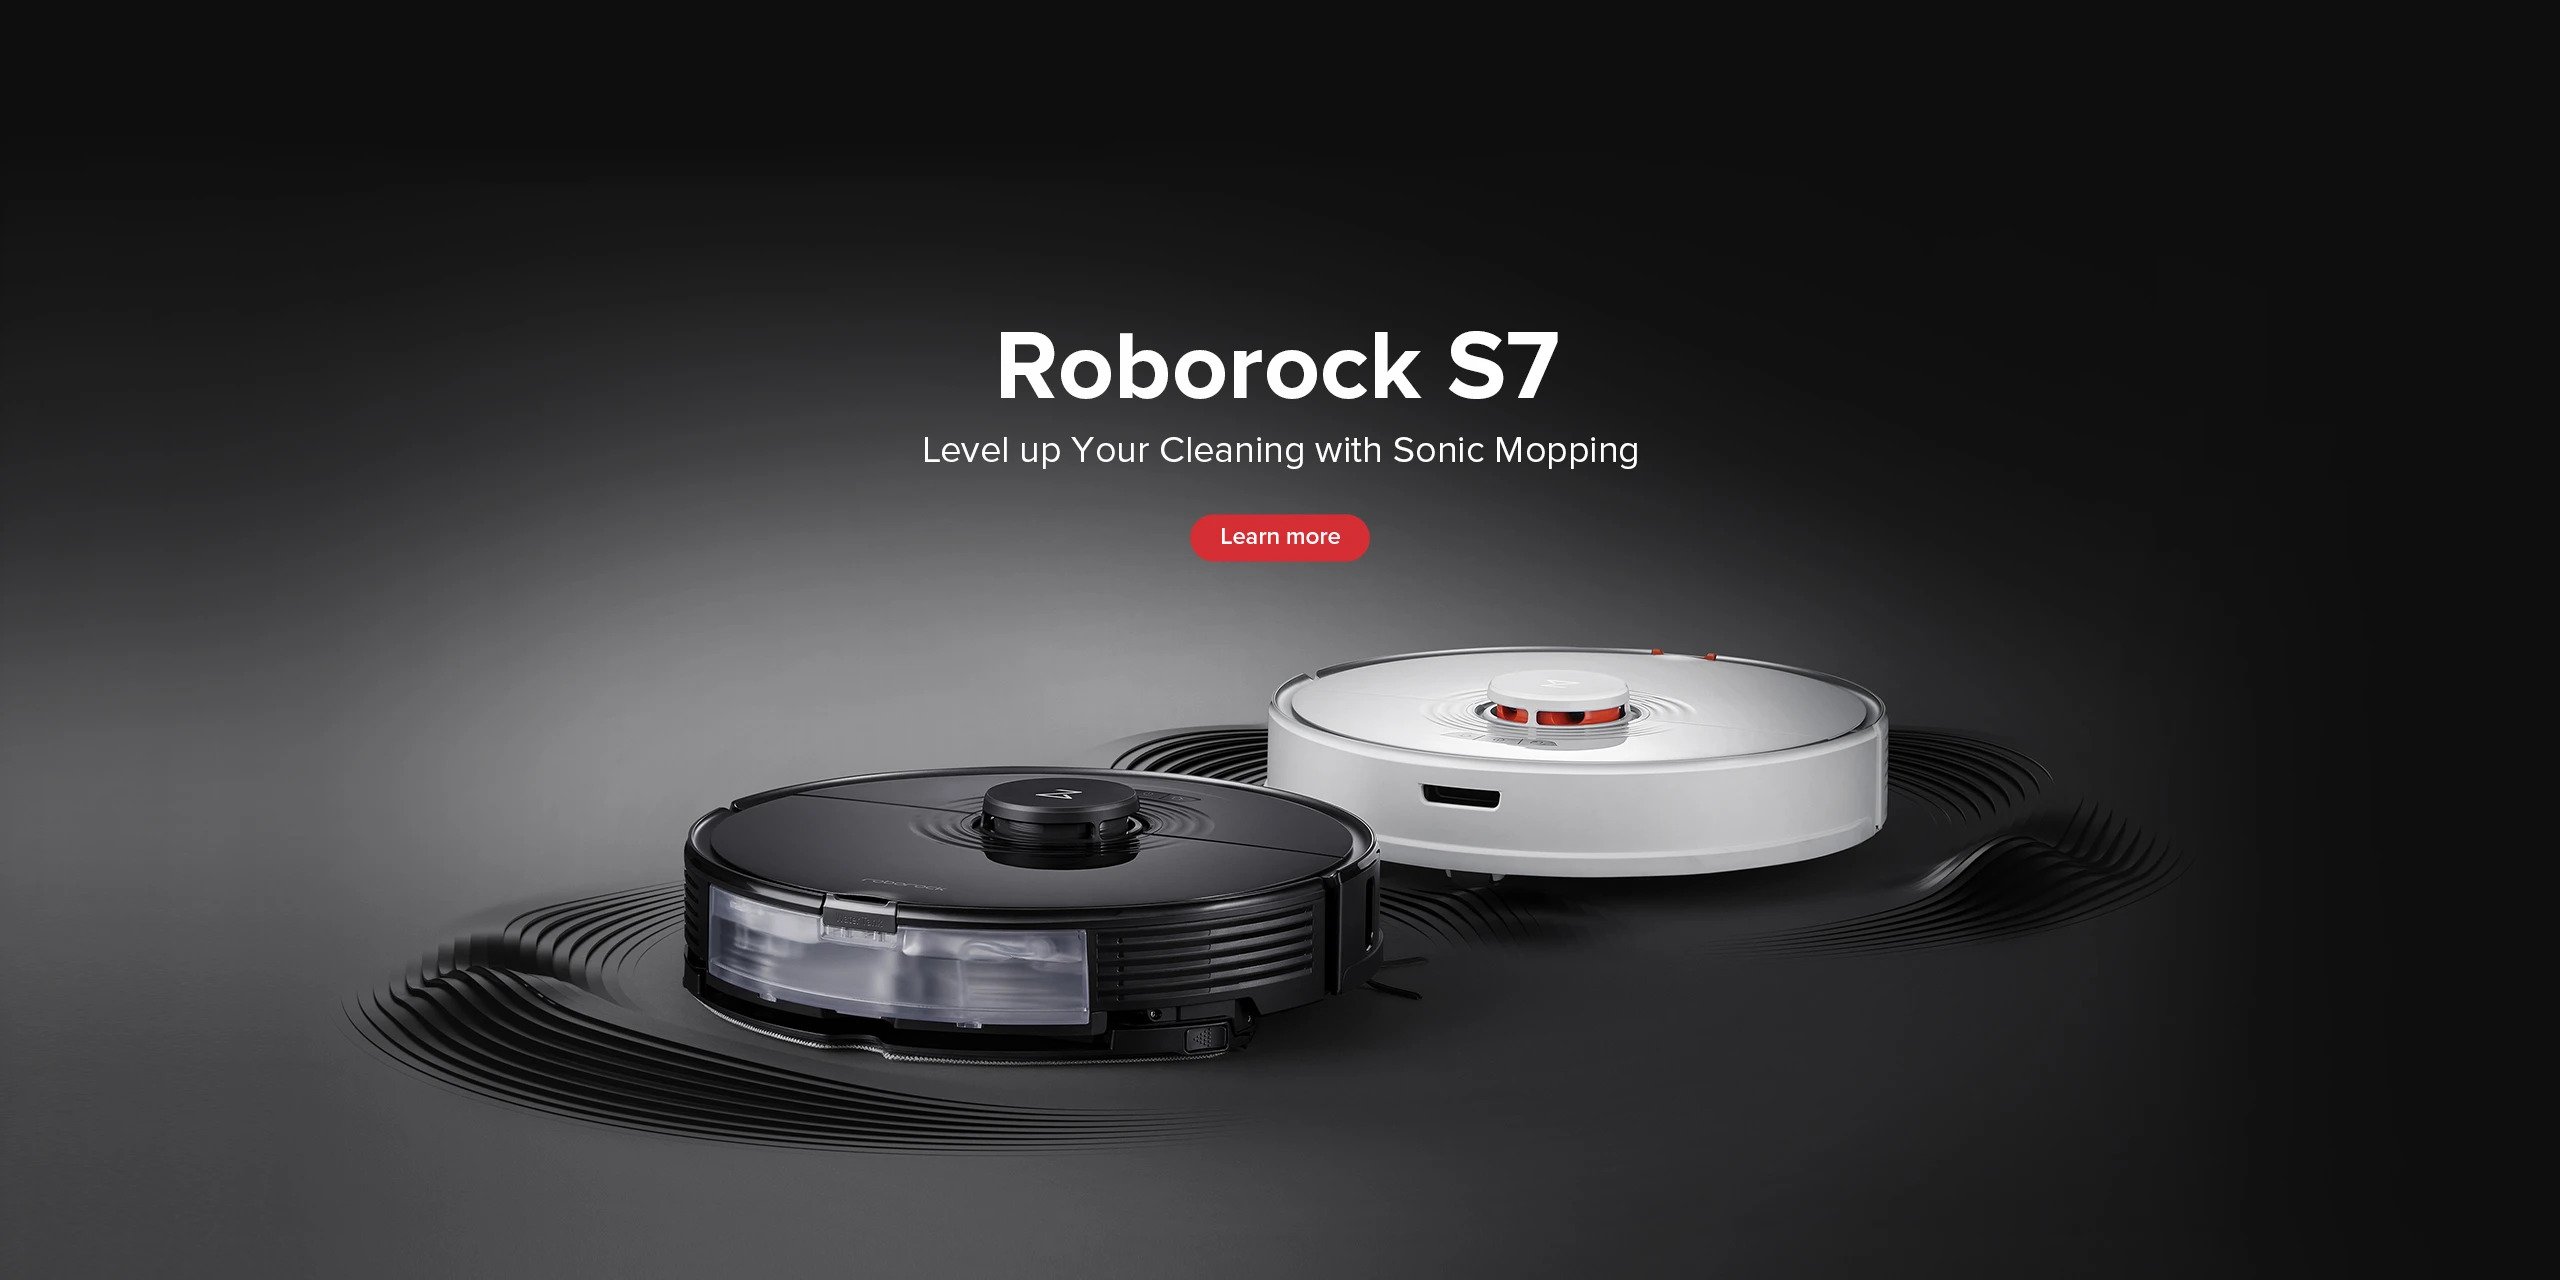 Roborock Announces Expansion Into Target with Its Innovative S7 Max Ultra